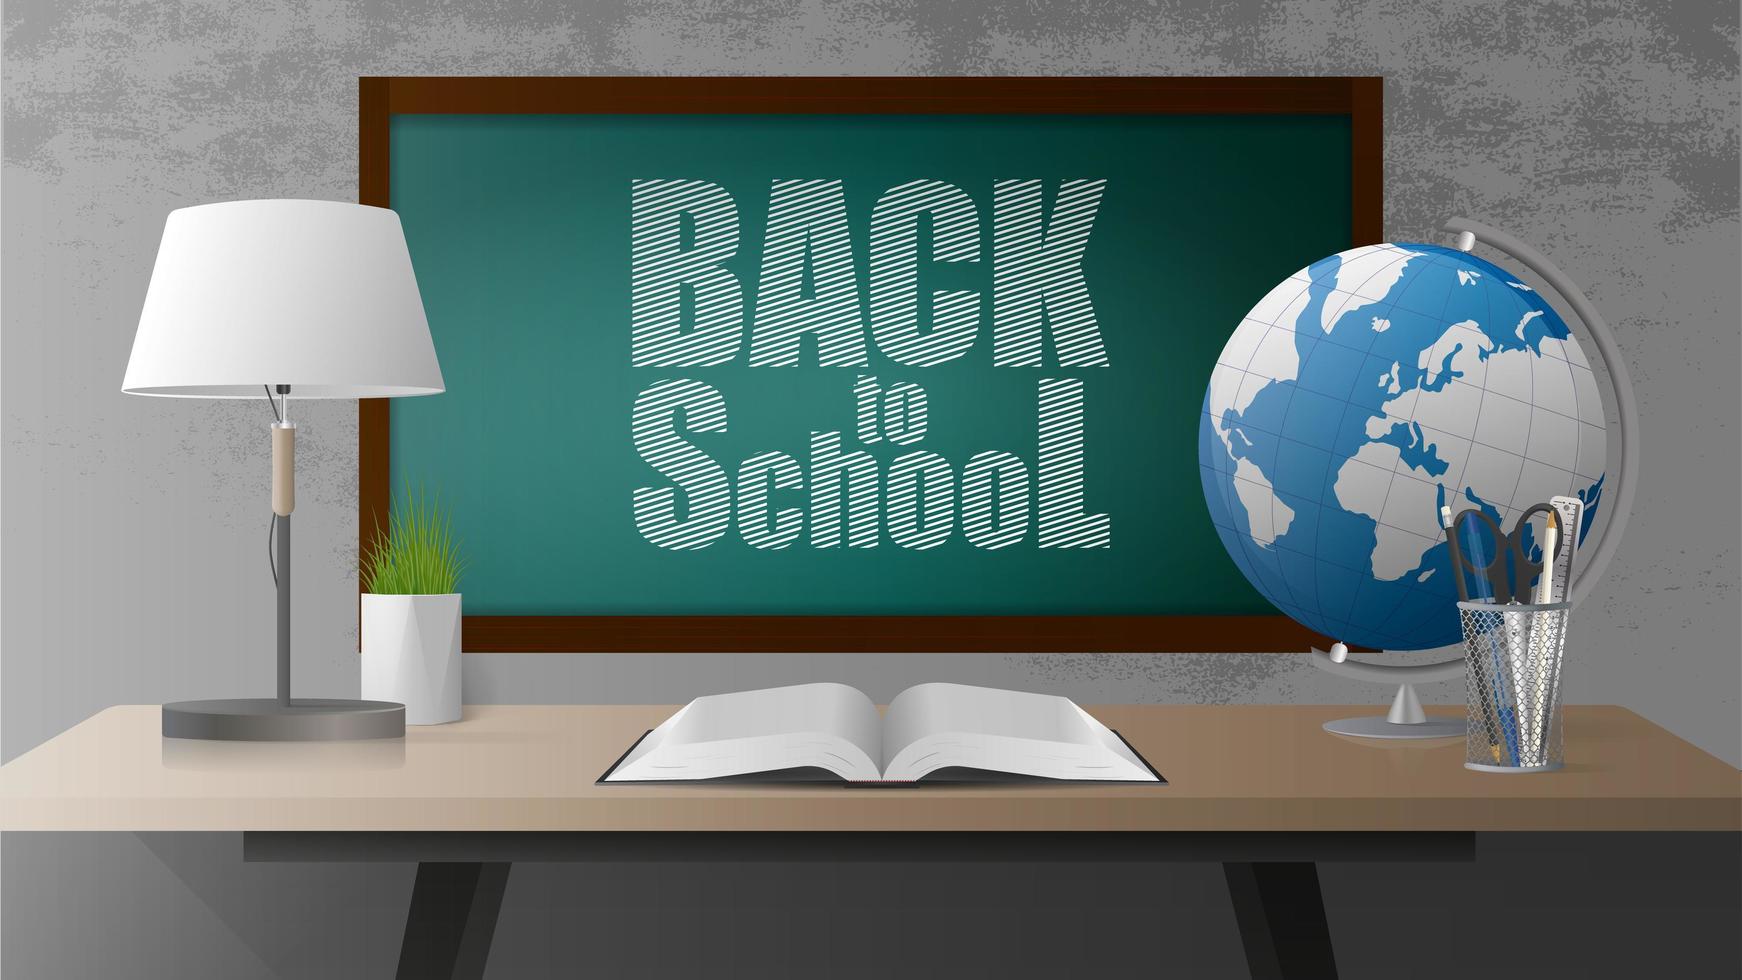 Back to school banner. Green board, open book, wooden table in the loft style, globe, table lamp, pot of grass, gray concrete wall. Realistic style vector illustration.